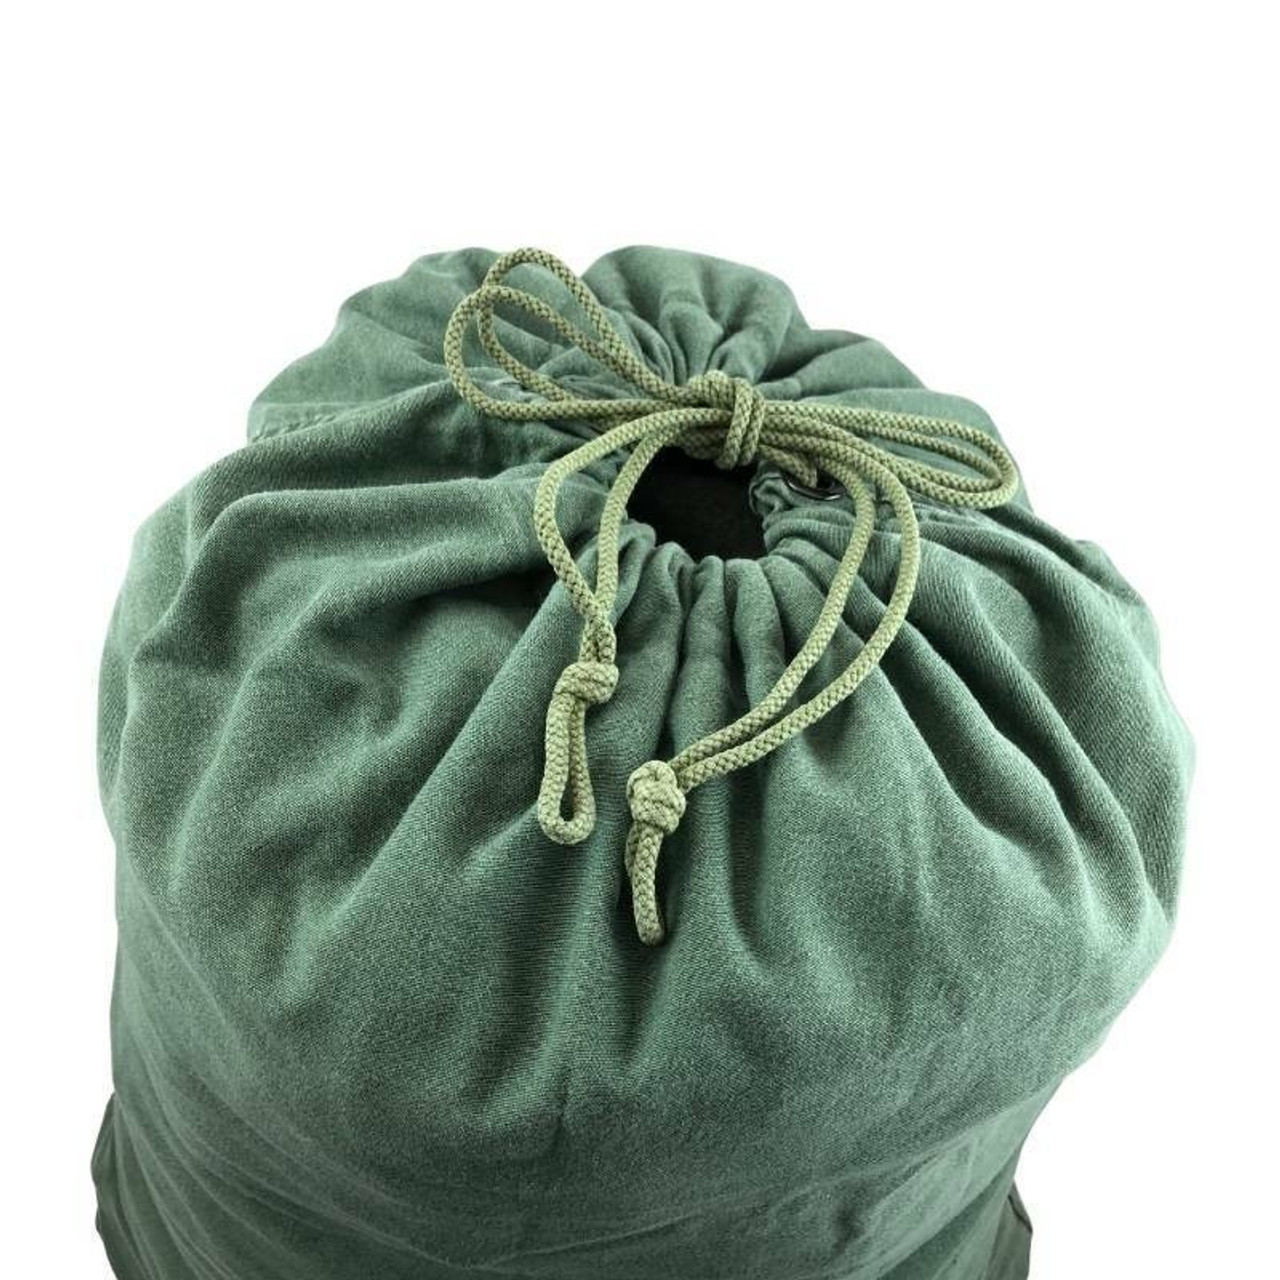 US Military BARRACKS BAG OD Green 100% Cotton Large Laundry Bag Army Issue ACC 